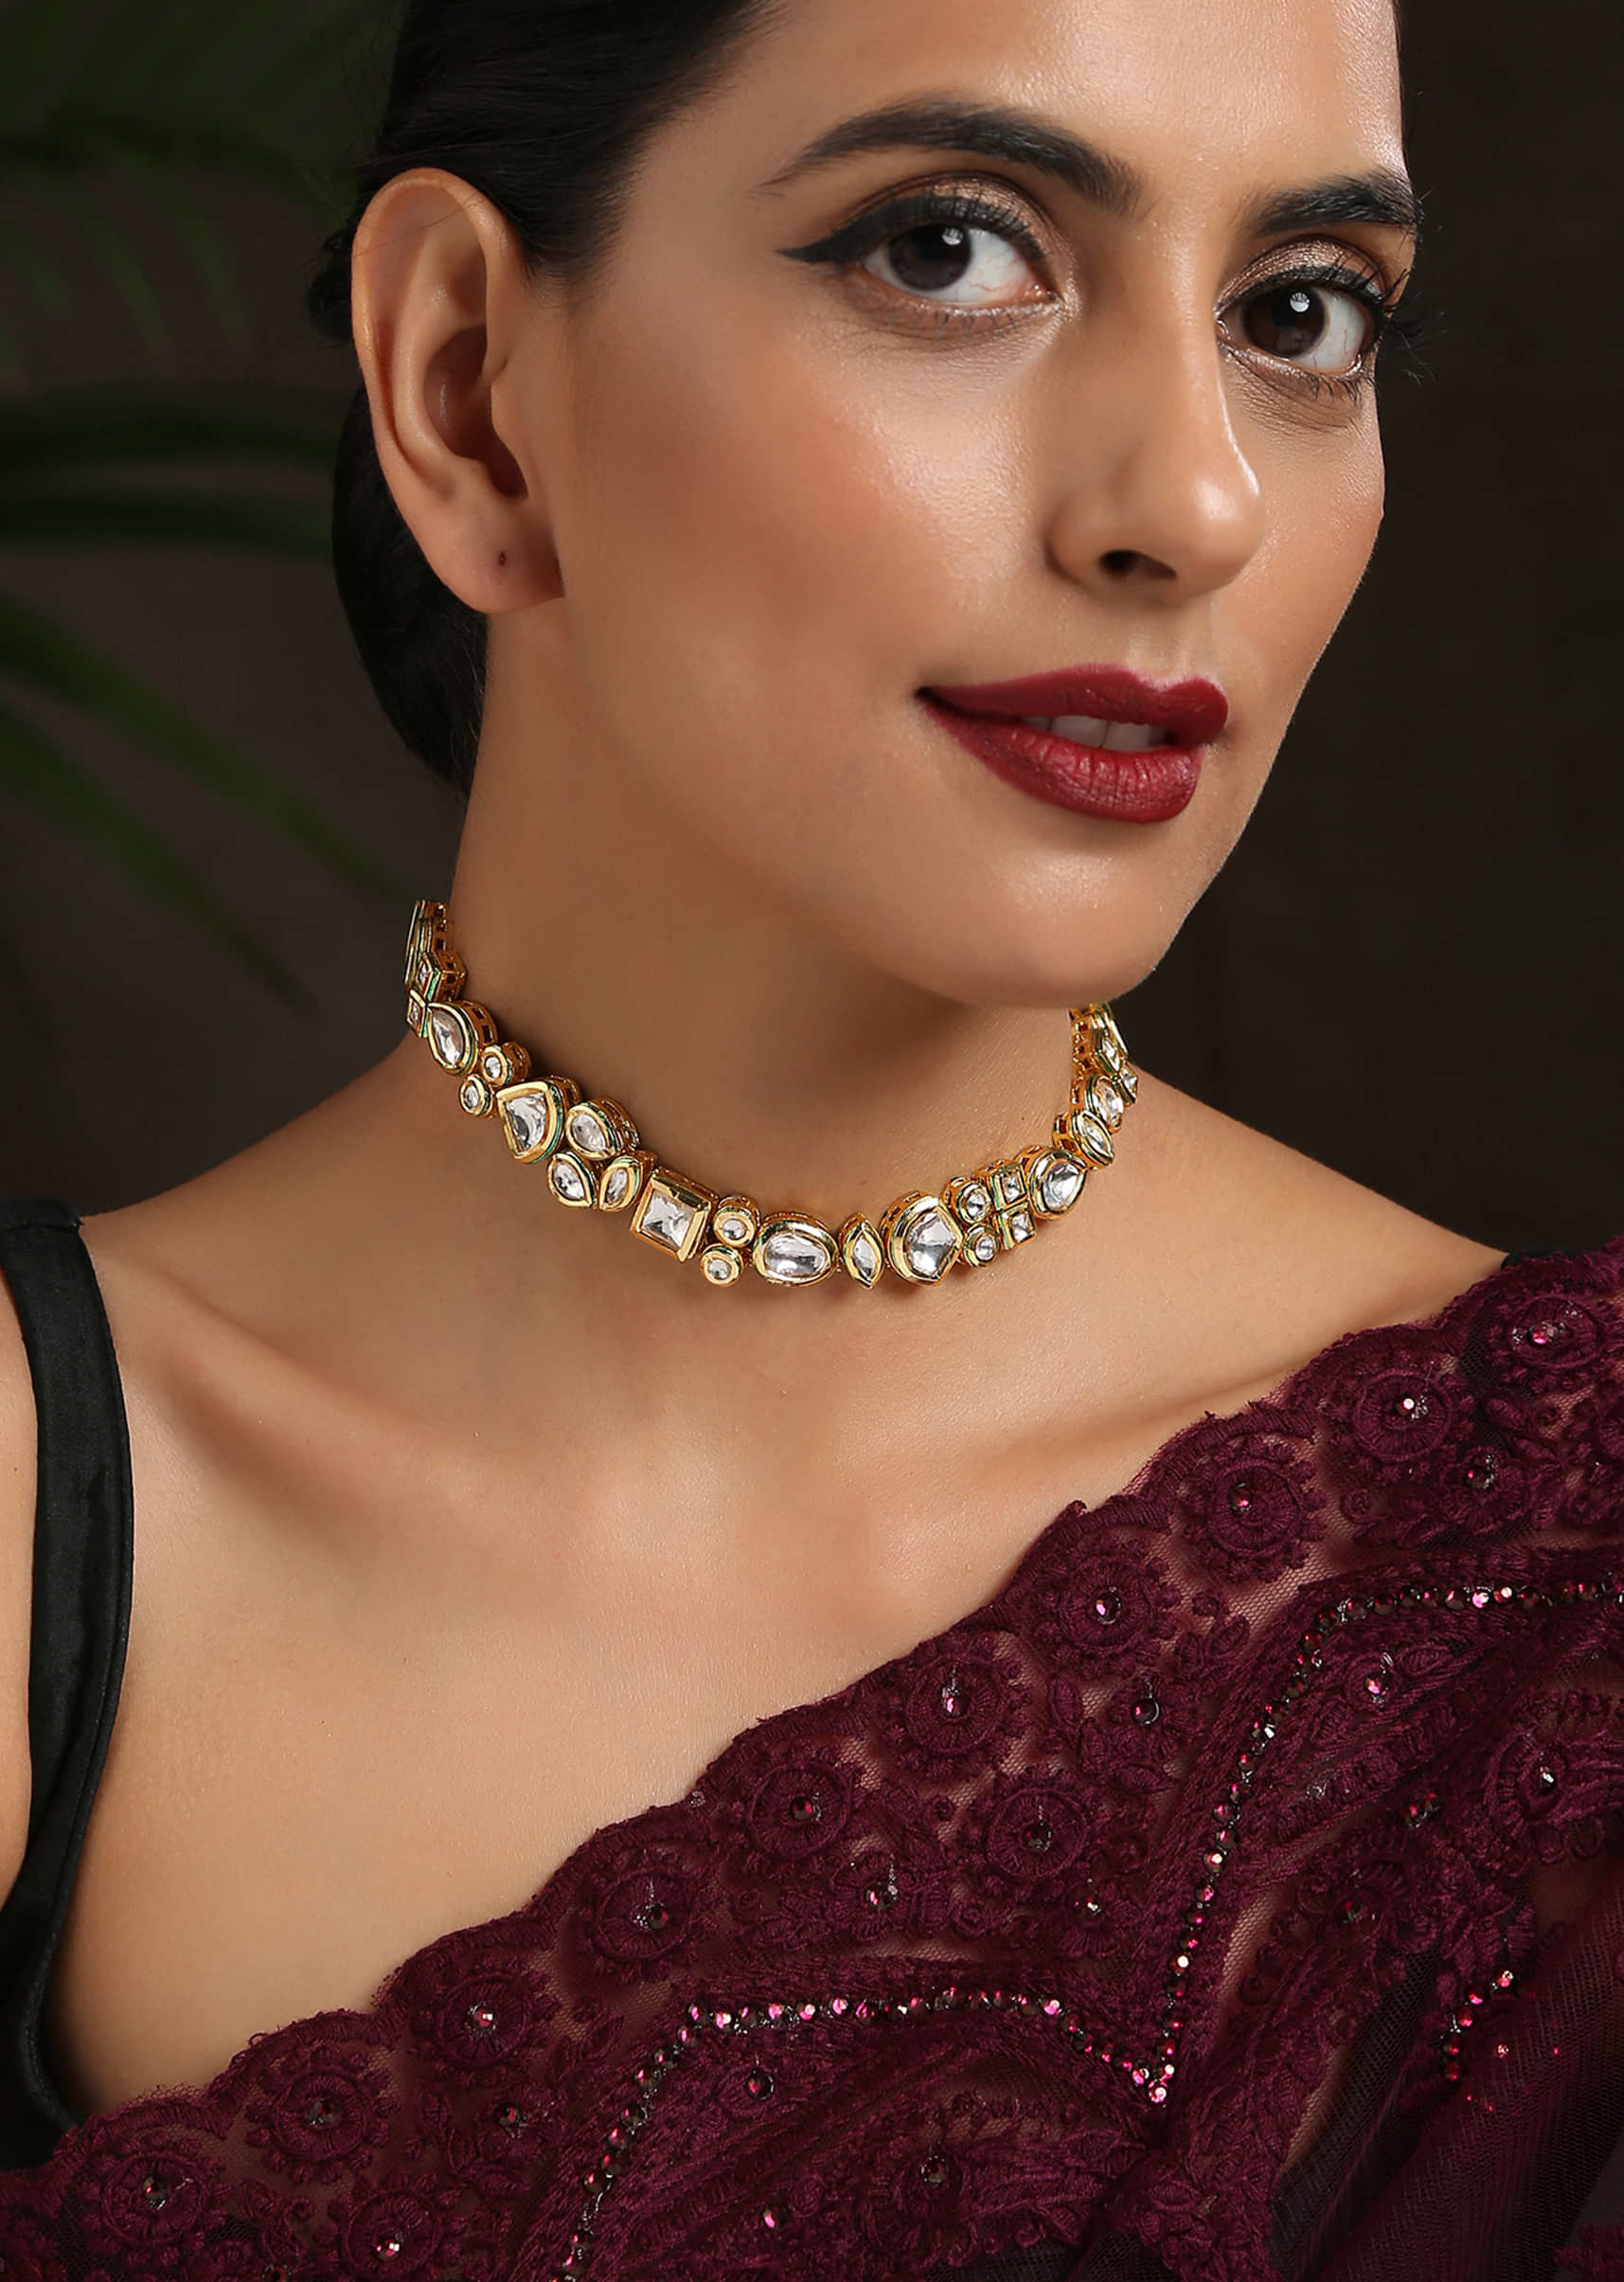 Gold Minimalist Choker Necklace In An Edgy Kundan Design By Paisley Pop